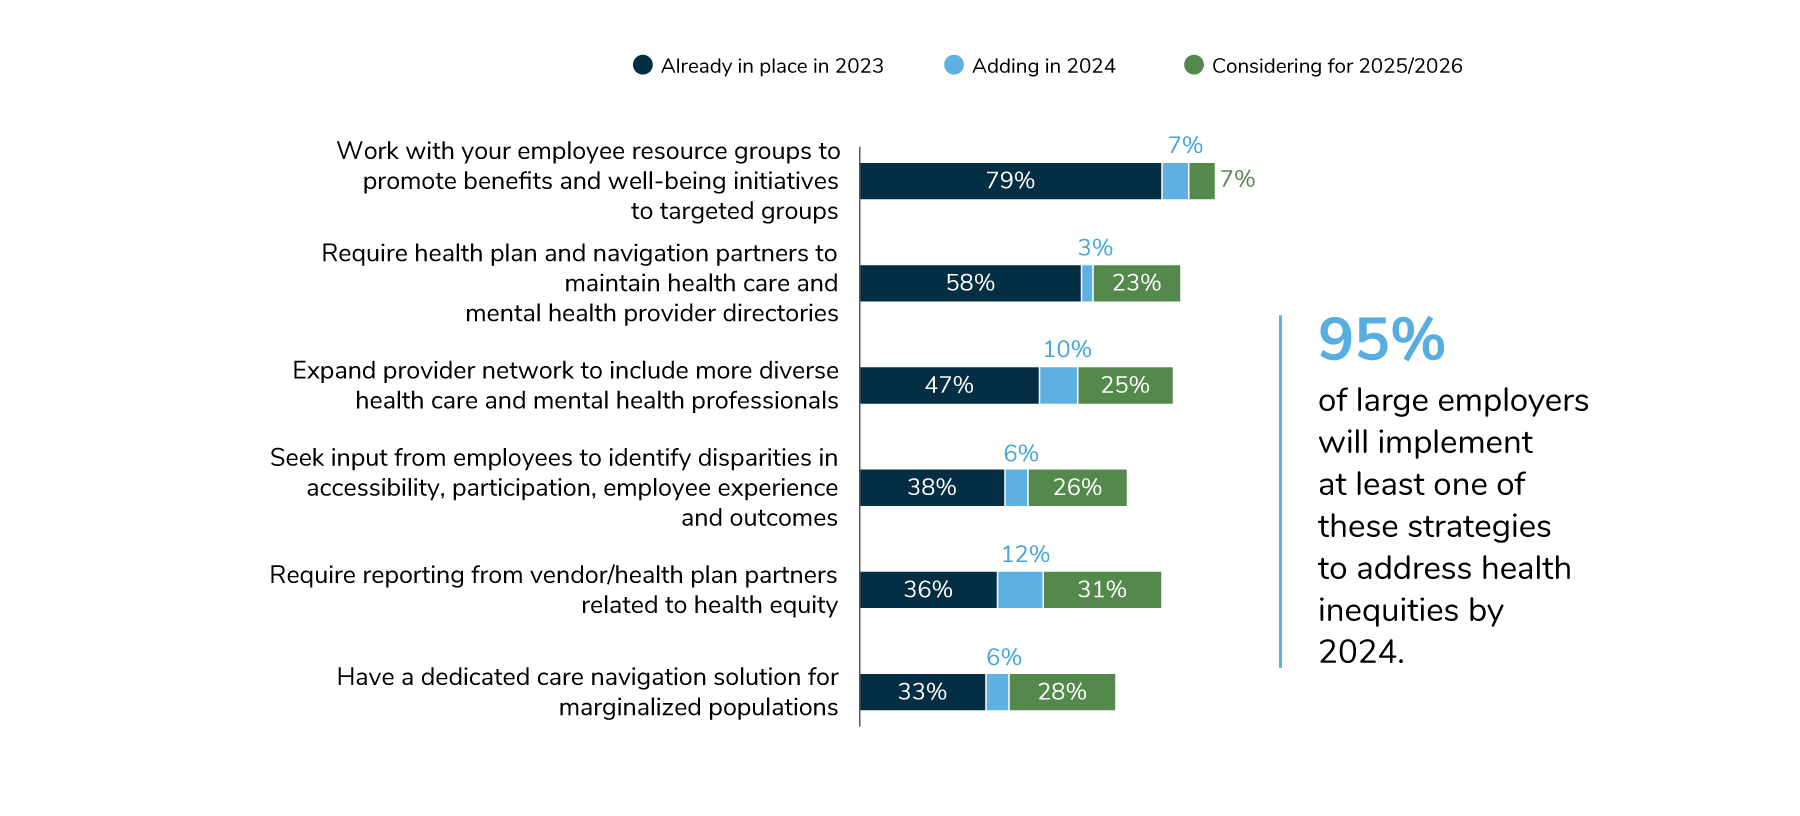 86% of employers will work with their ERGs in 2024 to promote benefits and well-being initiatives. 61% will require health plan and navigation partners to maintain health care and mental health  provider directories. 57% will expand provider networks to include more diverse providers.